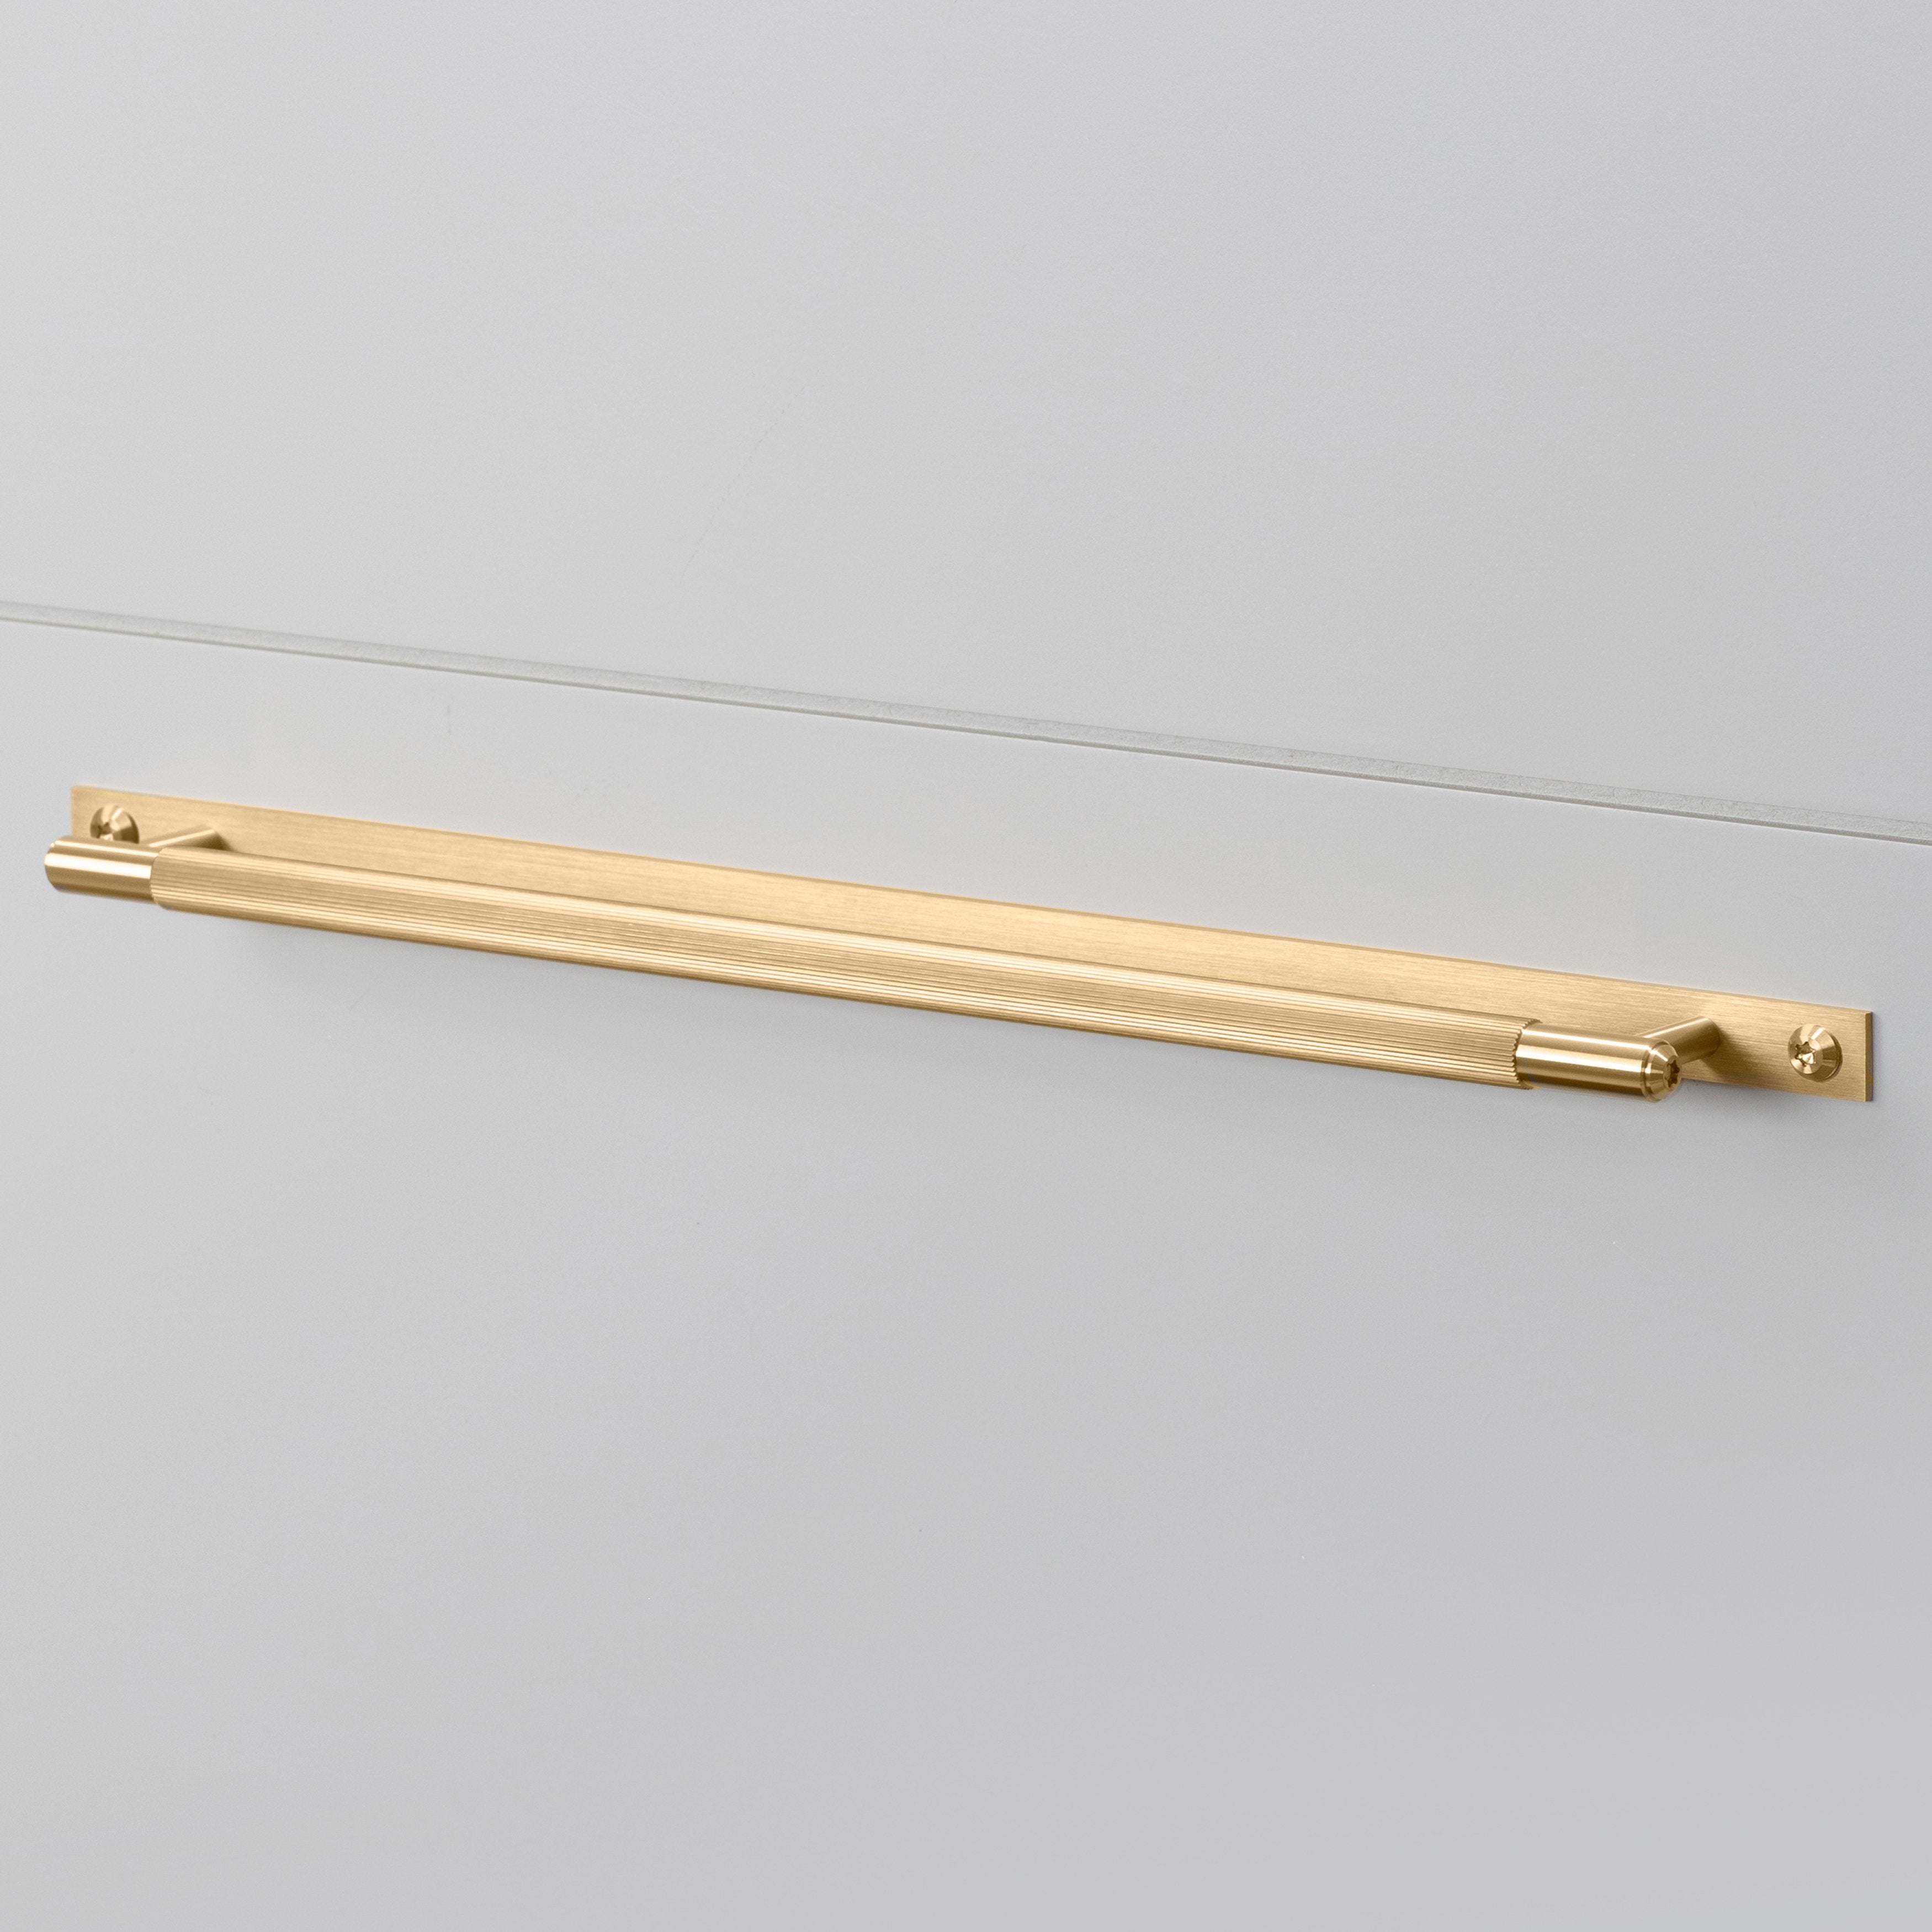 PULL BAR / PLATE / LINEAR / BRASS - LARGE